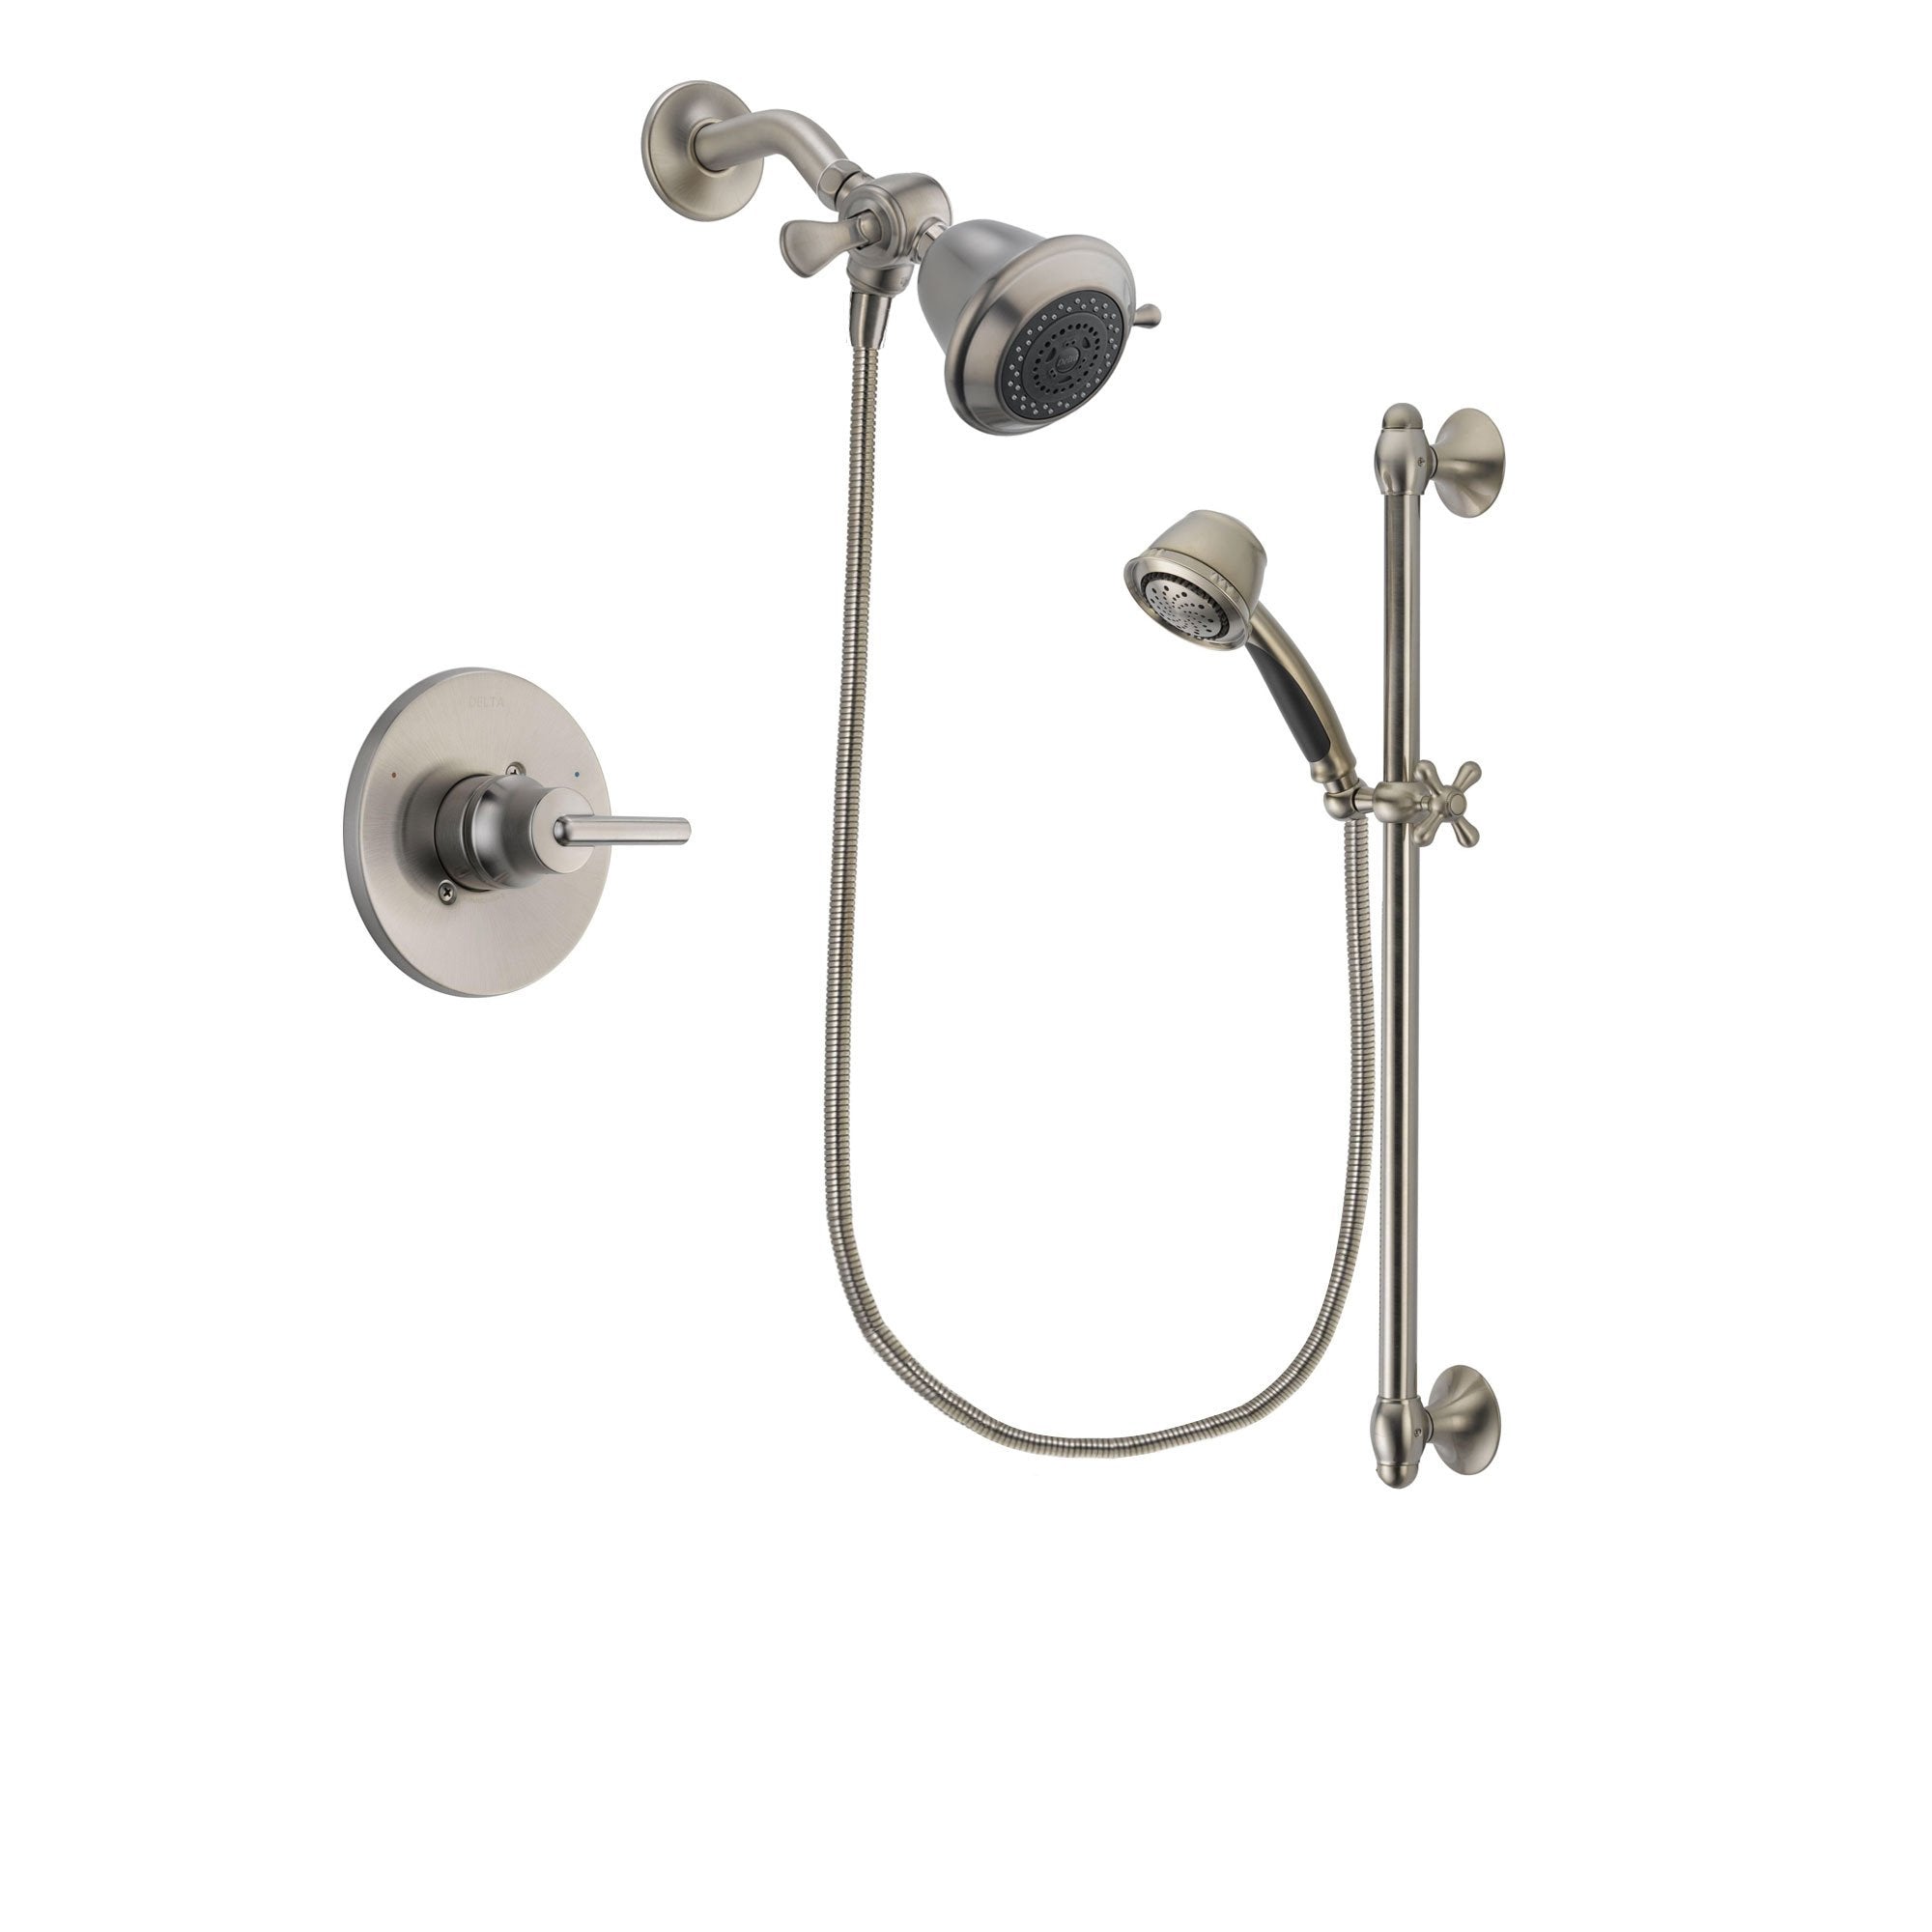 Delta Trinsic Stainless Steel Finish Shower Faucet System Package with Shower Head and 5-Spray Personal Handshower with Slide Bar Includes Rough-in Valve DSP1254V